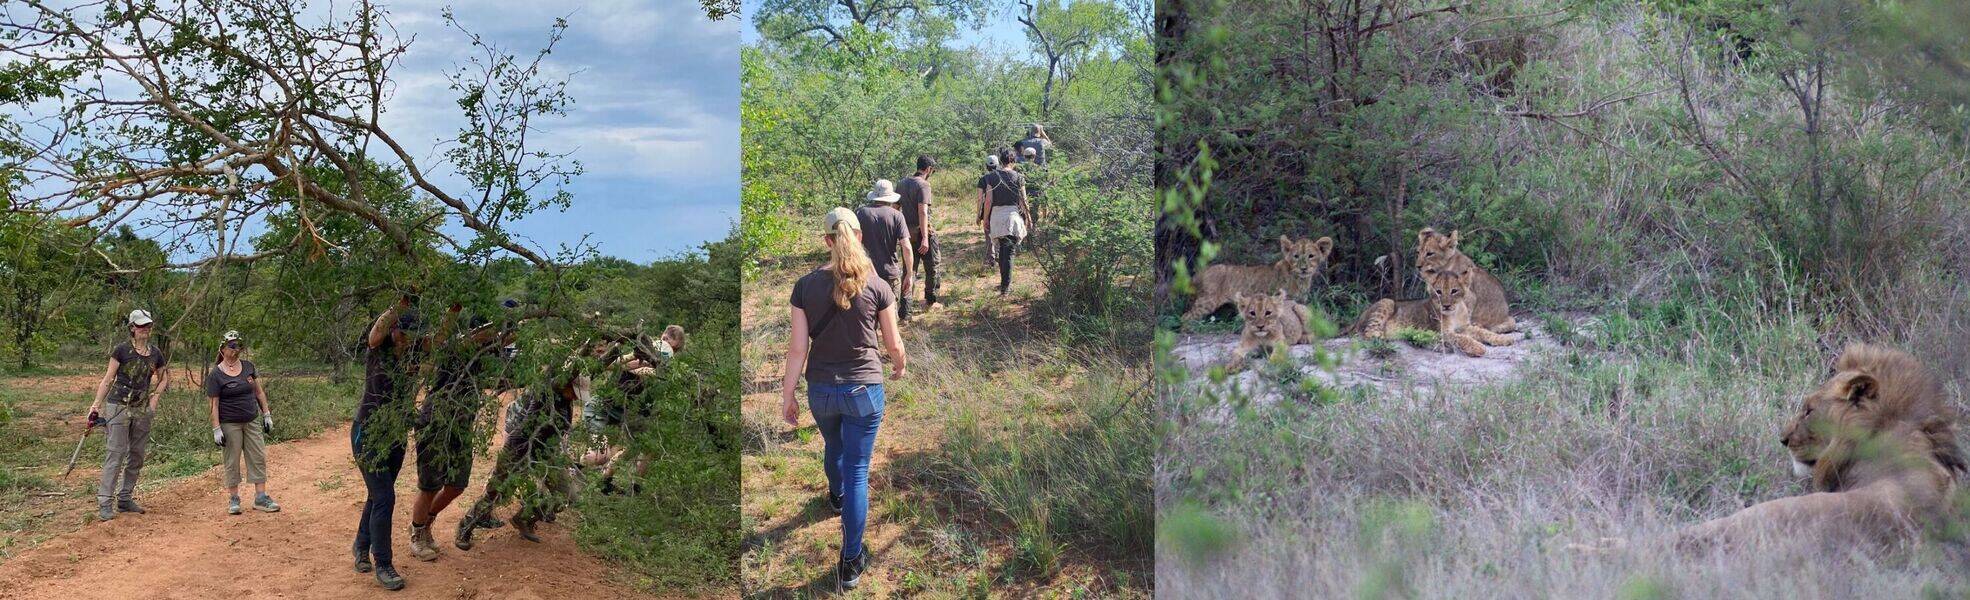 Volunteer work in the Big Five Project in South Africa